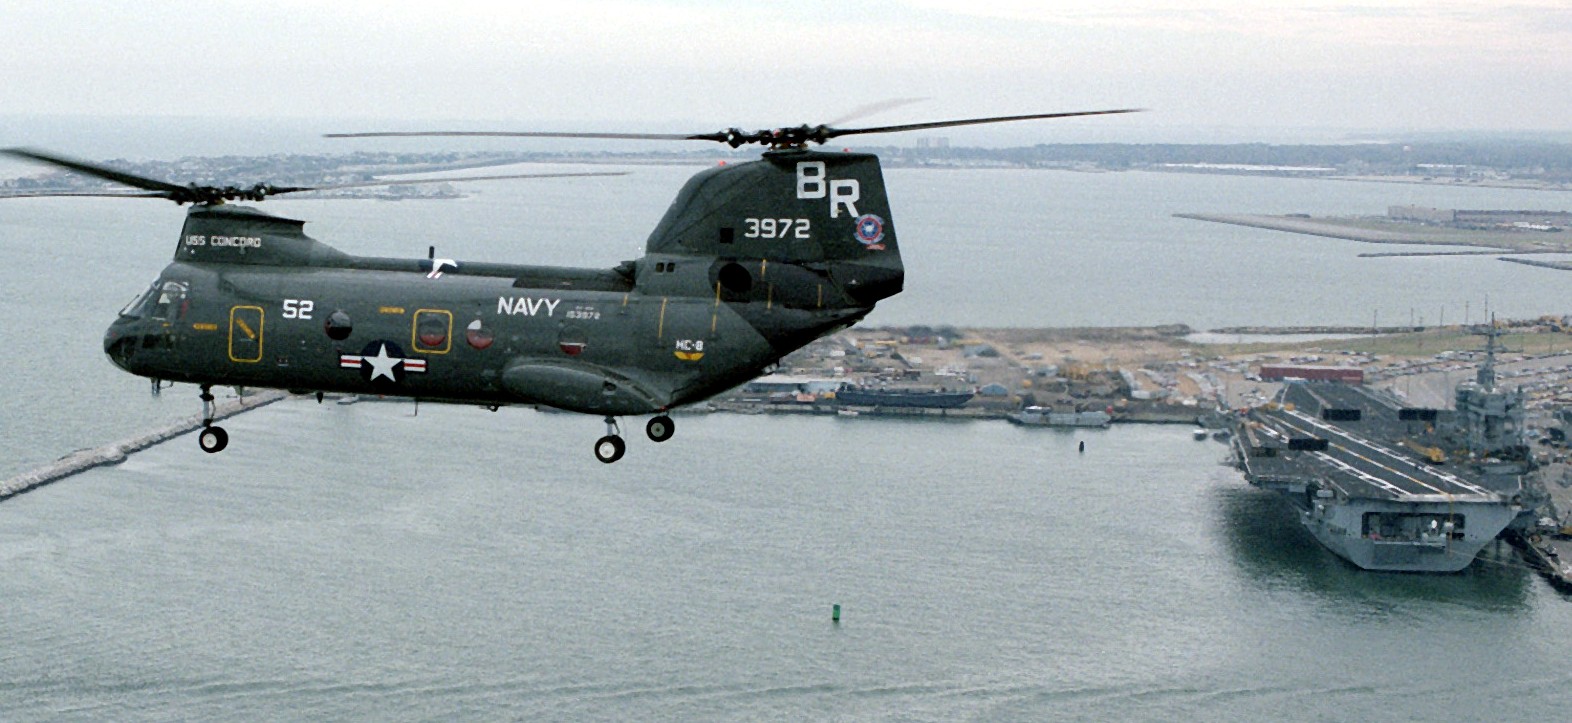 hc-8 dragon whales helicopter combat support squadron navy ch-46 sea knight 35